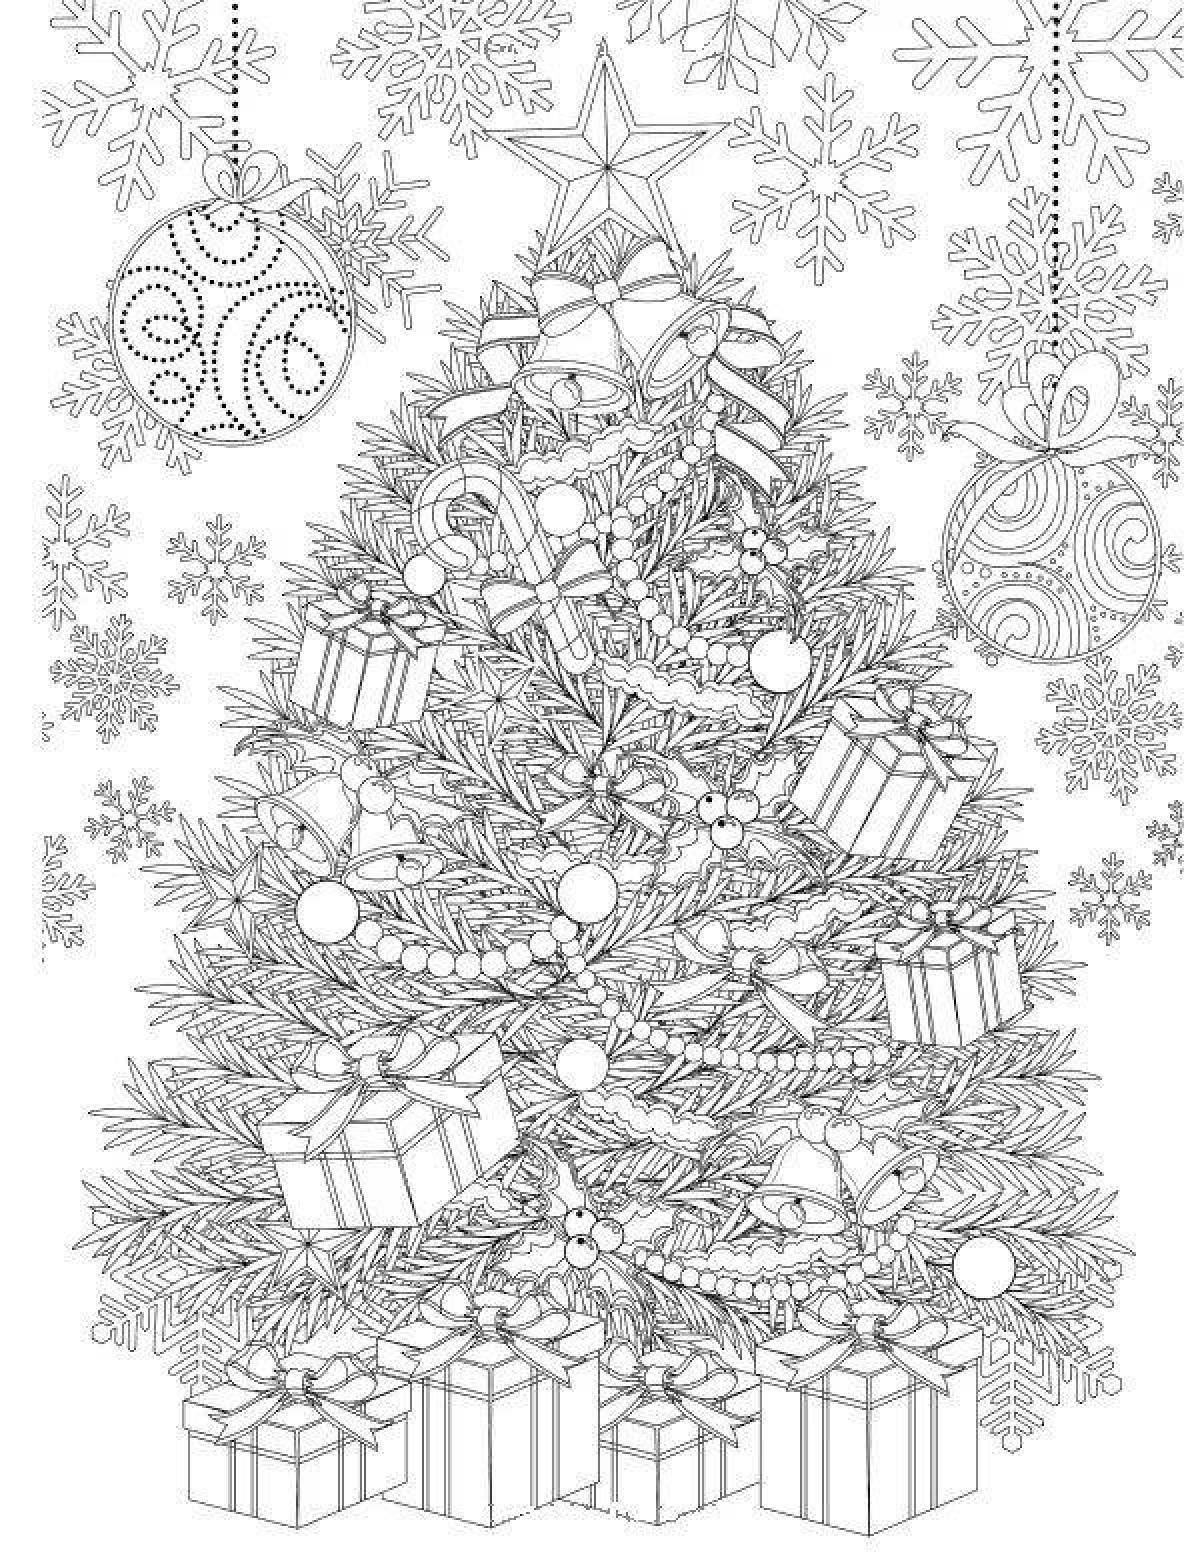 Colorful Christmas coloring book for adults